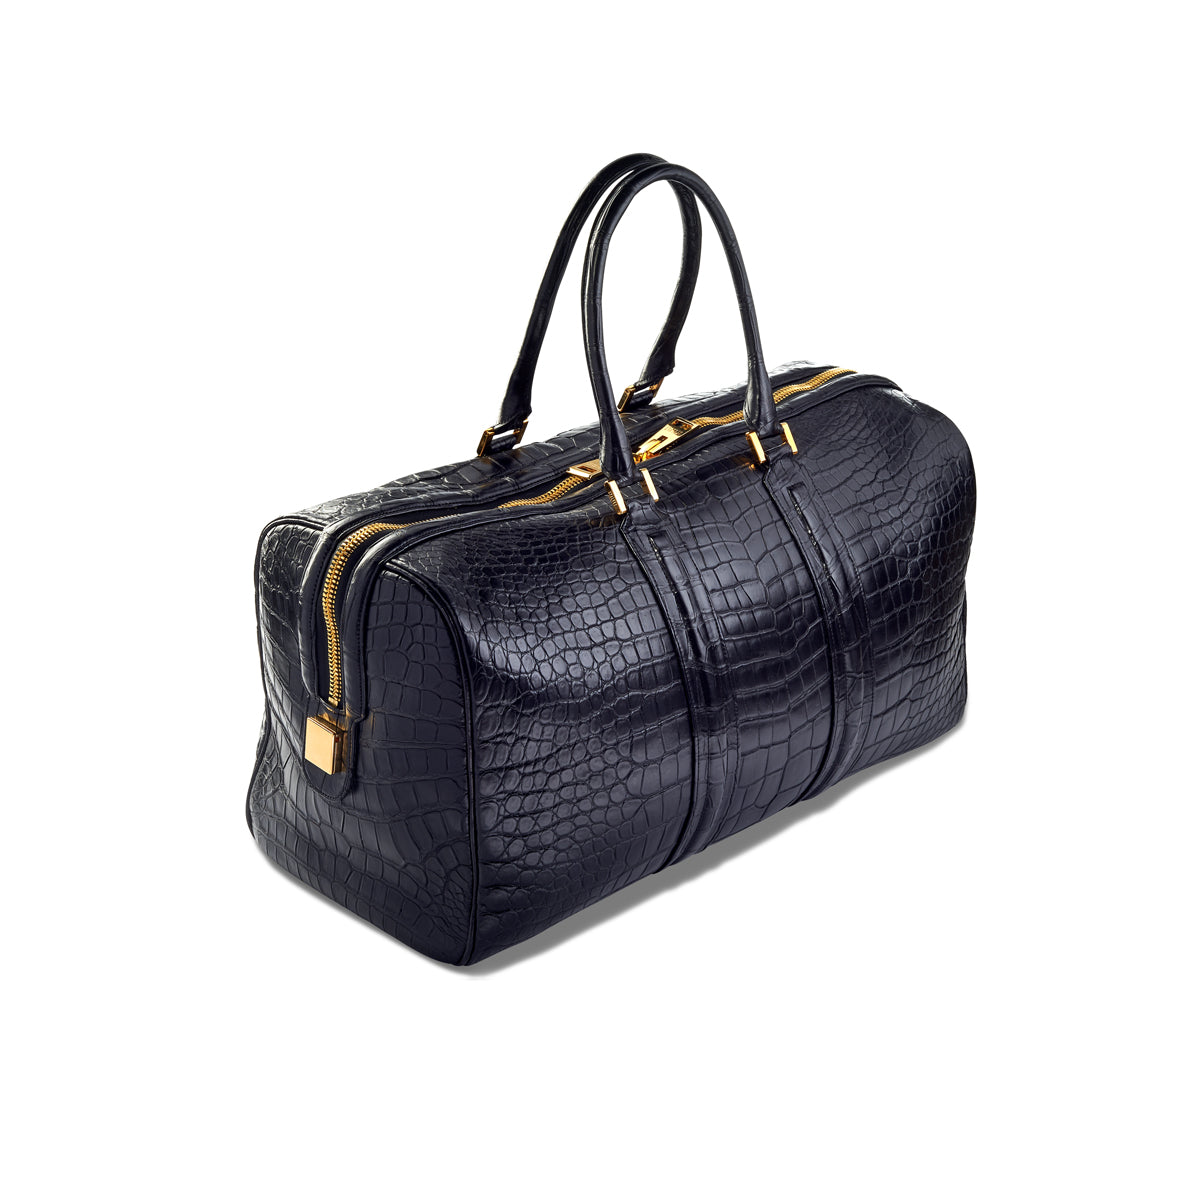 STALVEY Wong Duffel in Black Alligator with 24kt Gold Hardware Side View